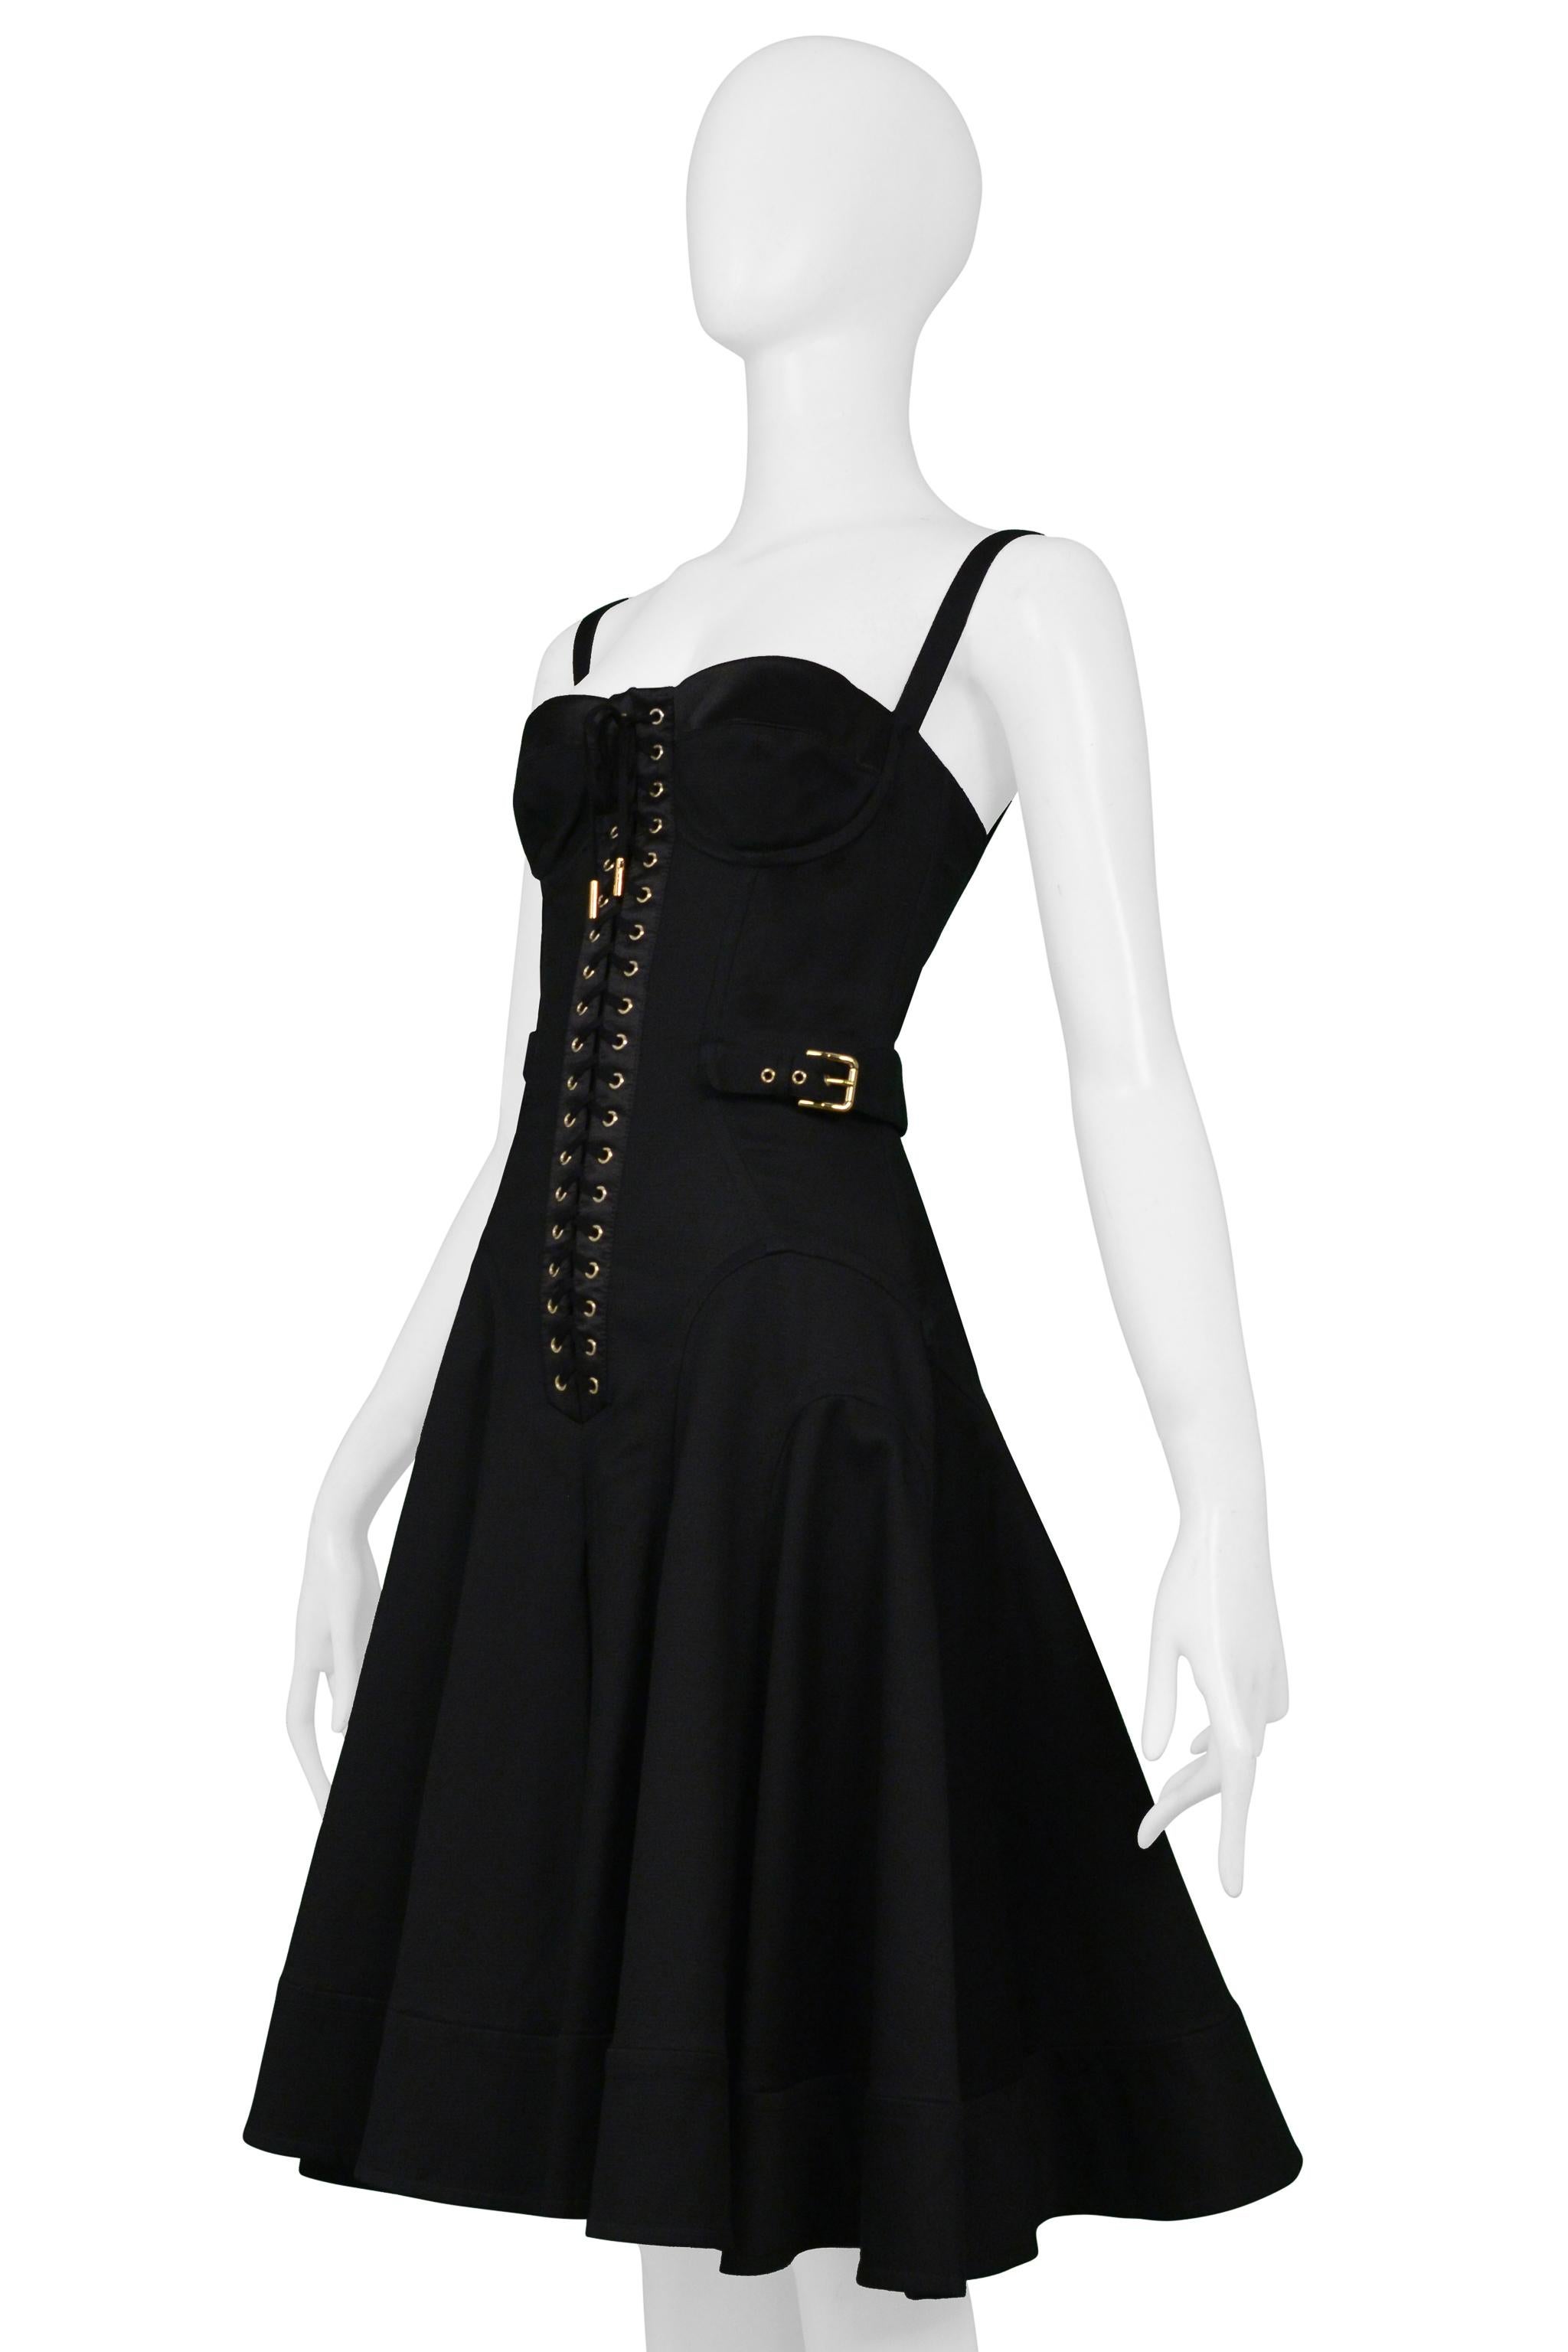 Docle & Gabbana Black Corset Dress With Buckles For Sale 1